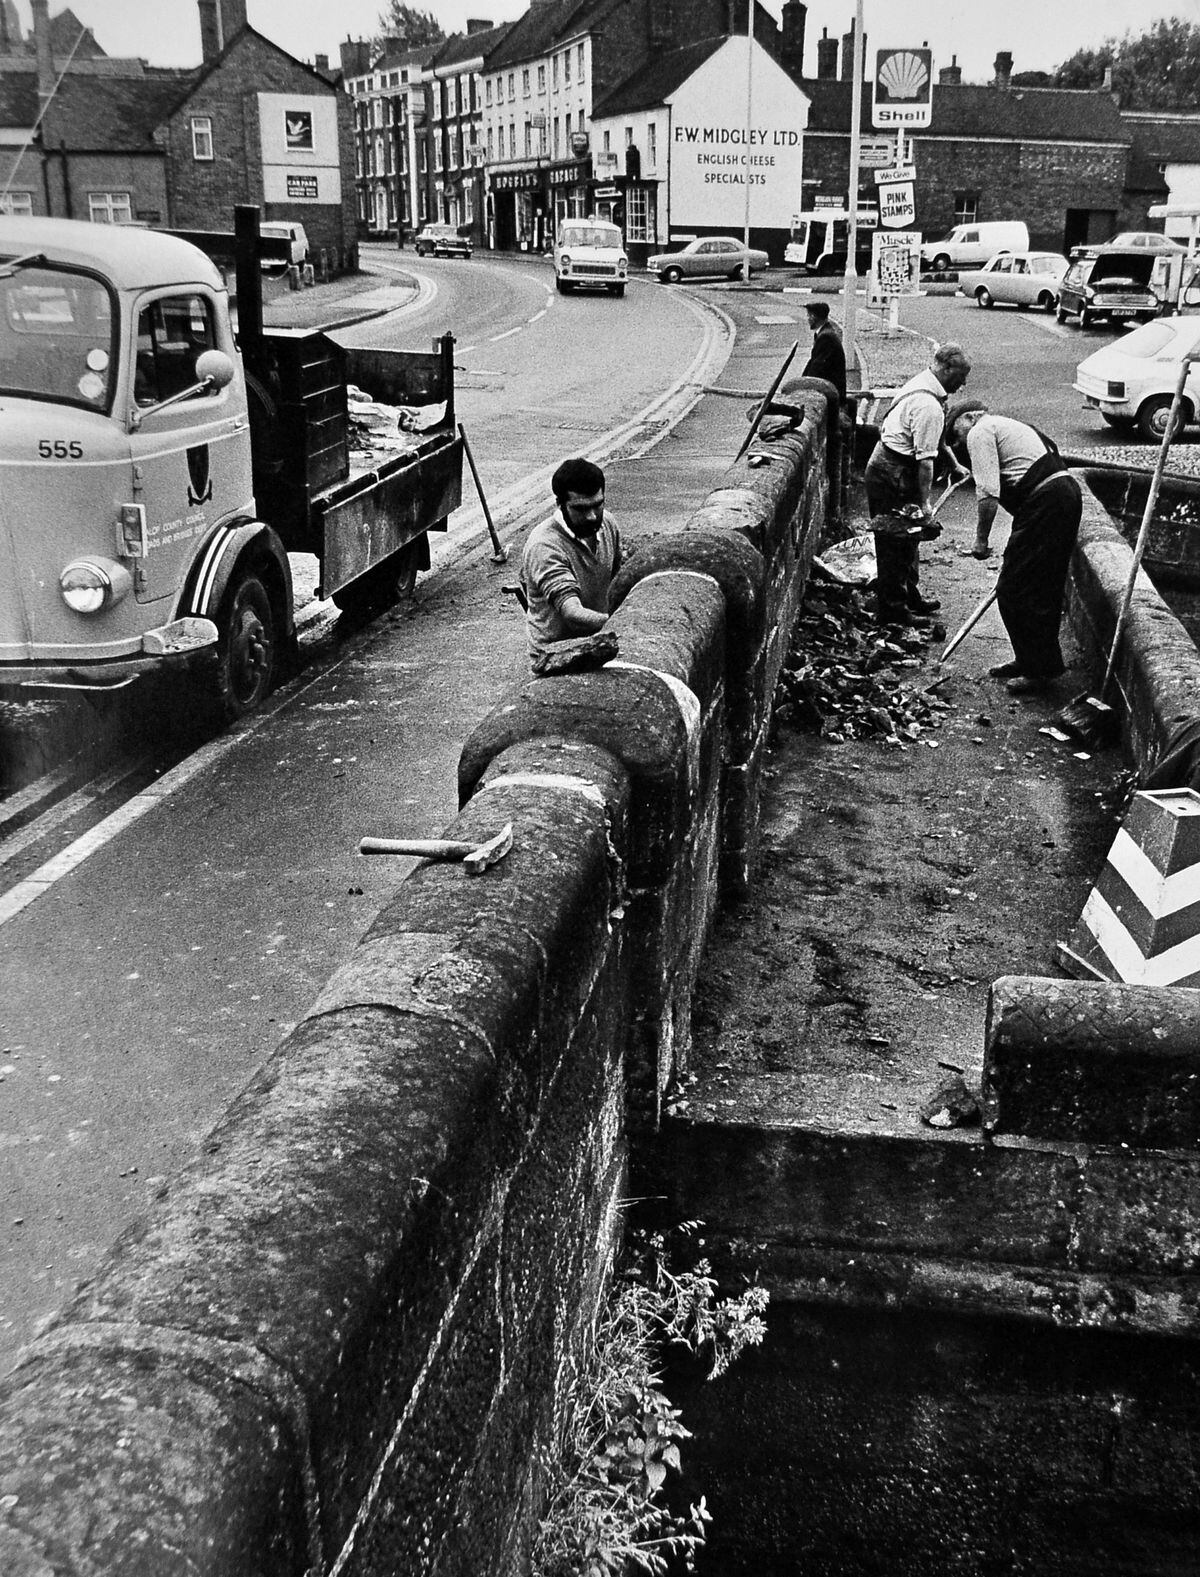 The canal bridge at the bottom of the High Street, an ancient monument, was damaged badly when it was hit by a car in 1974. County council workers were photographed repairing it the following week